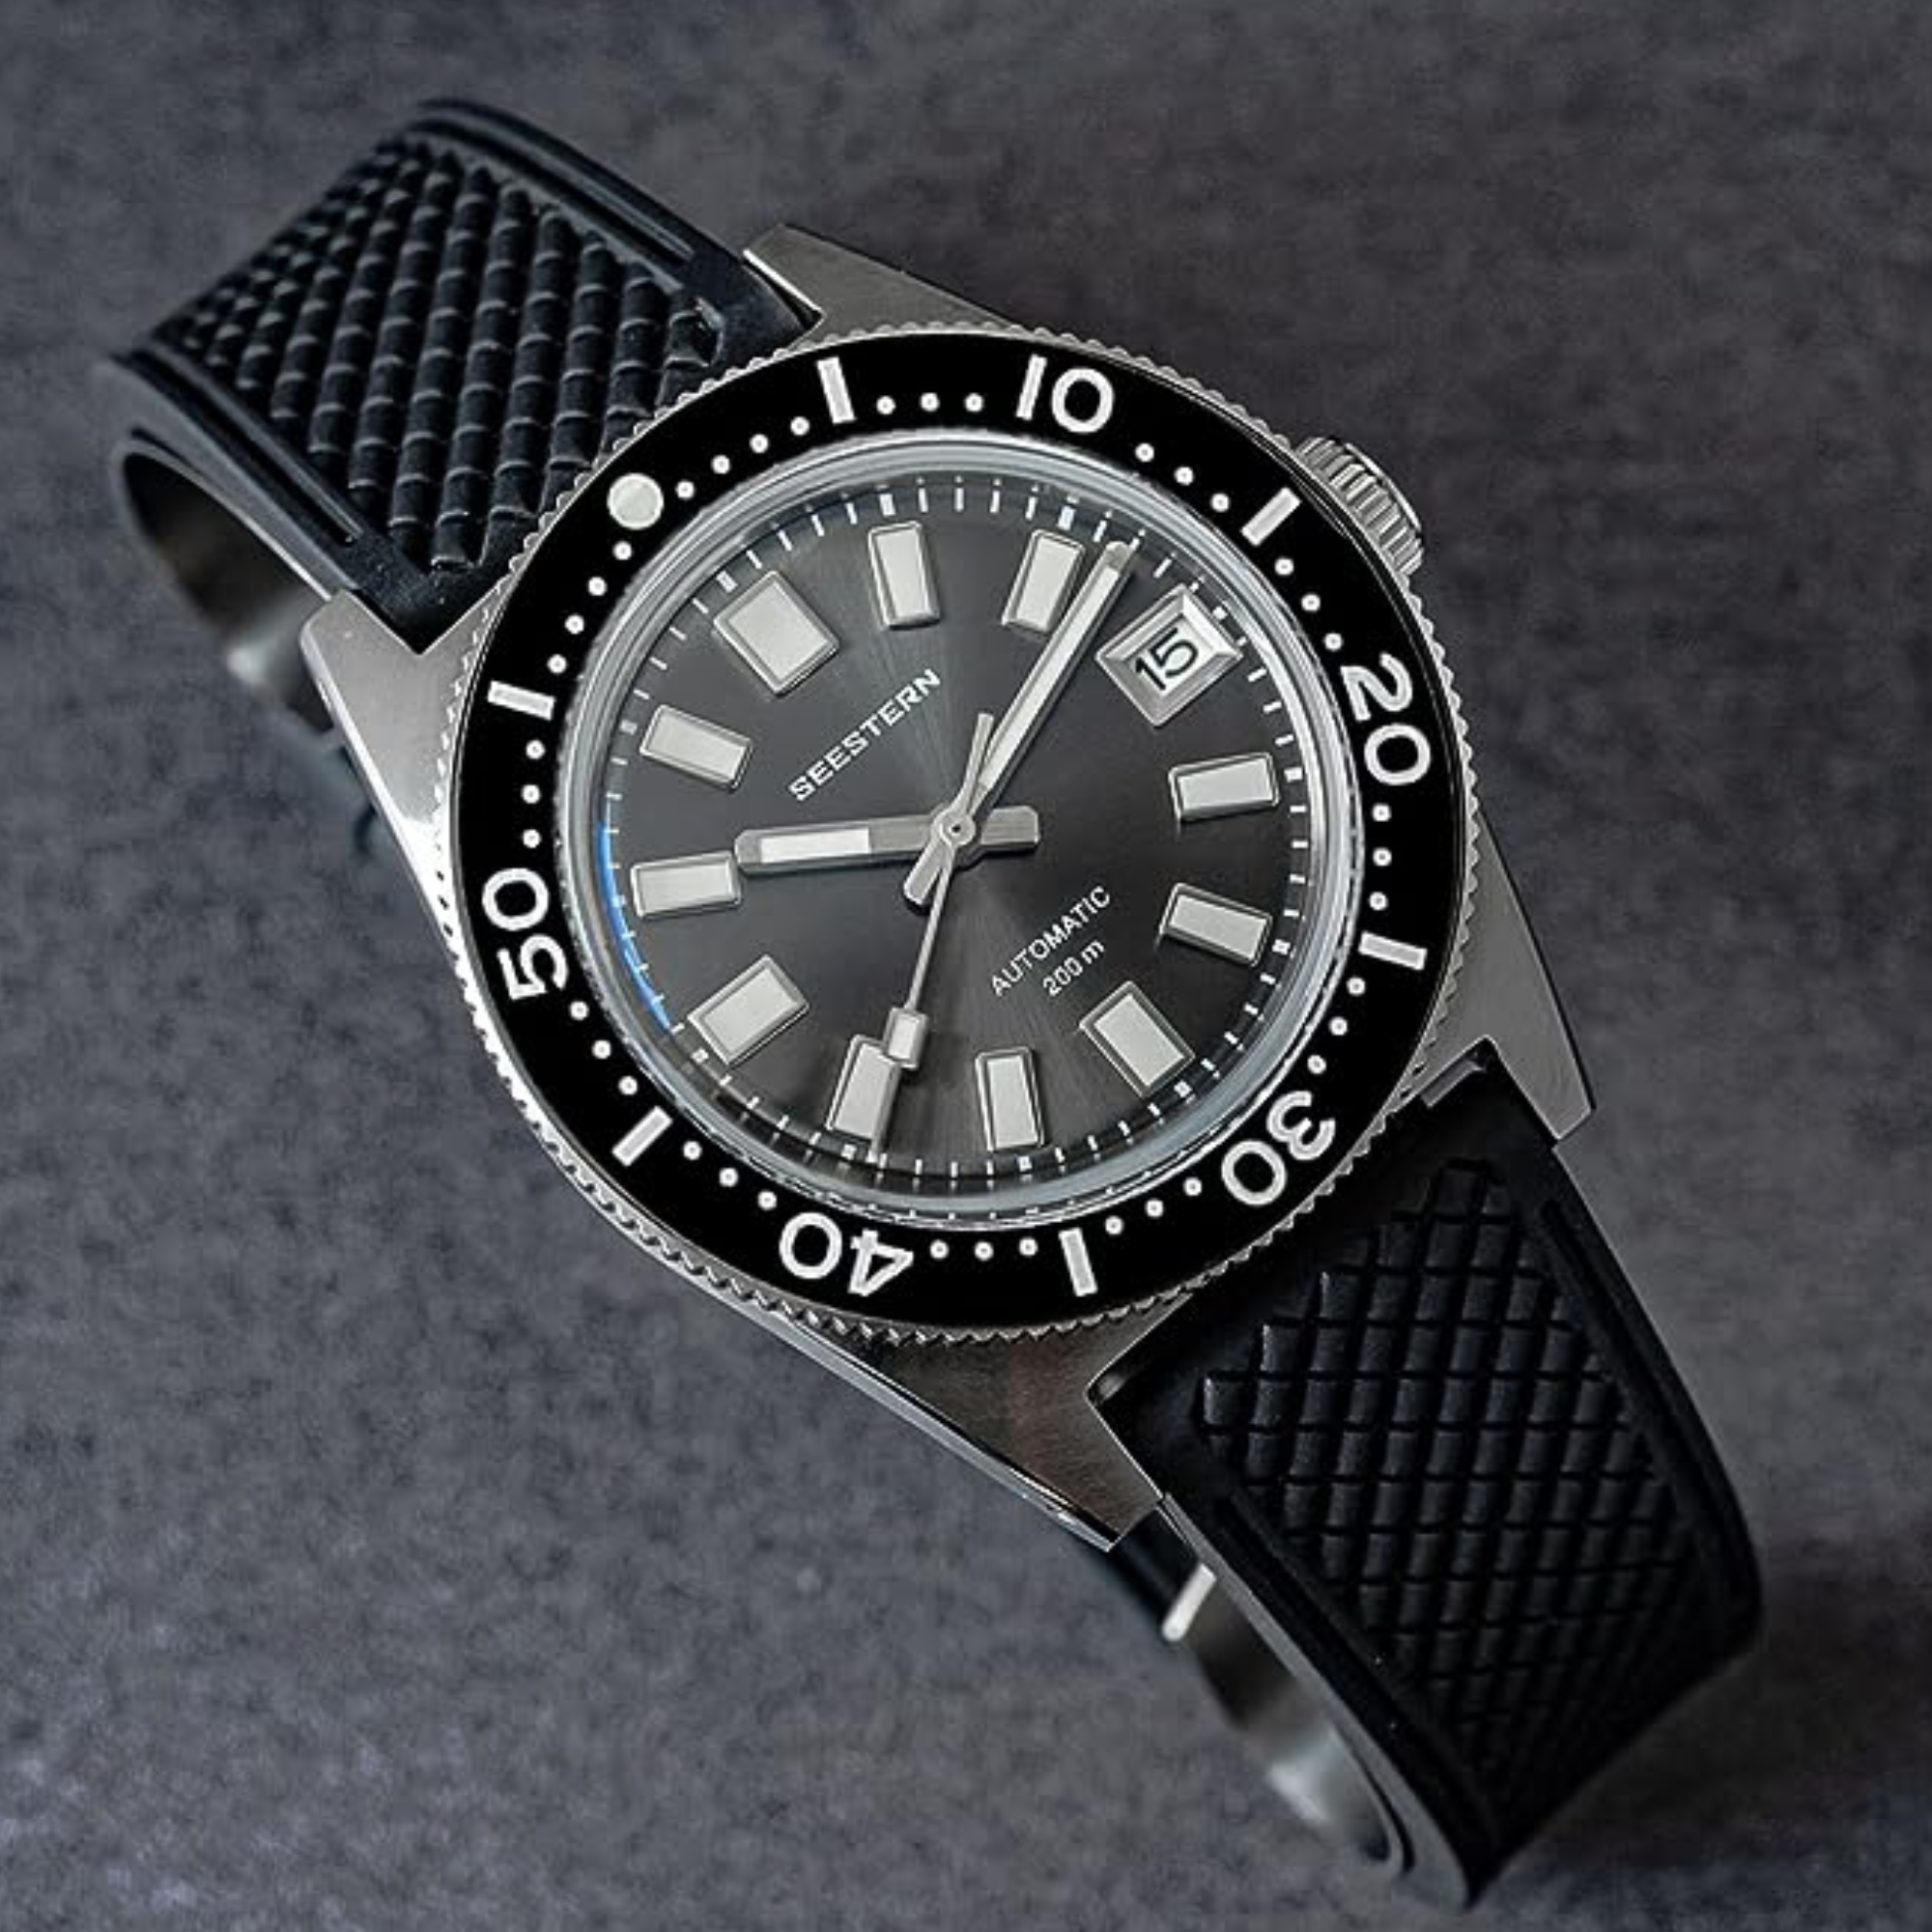 Seiko 5 SAPPHIRE+NATO for R6 140 for sale from a Private Seller on Chrono24